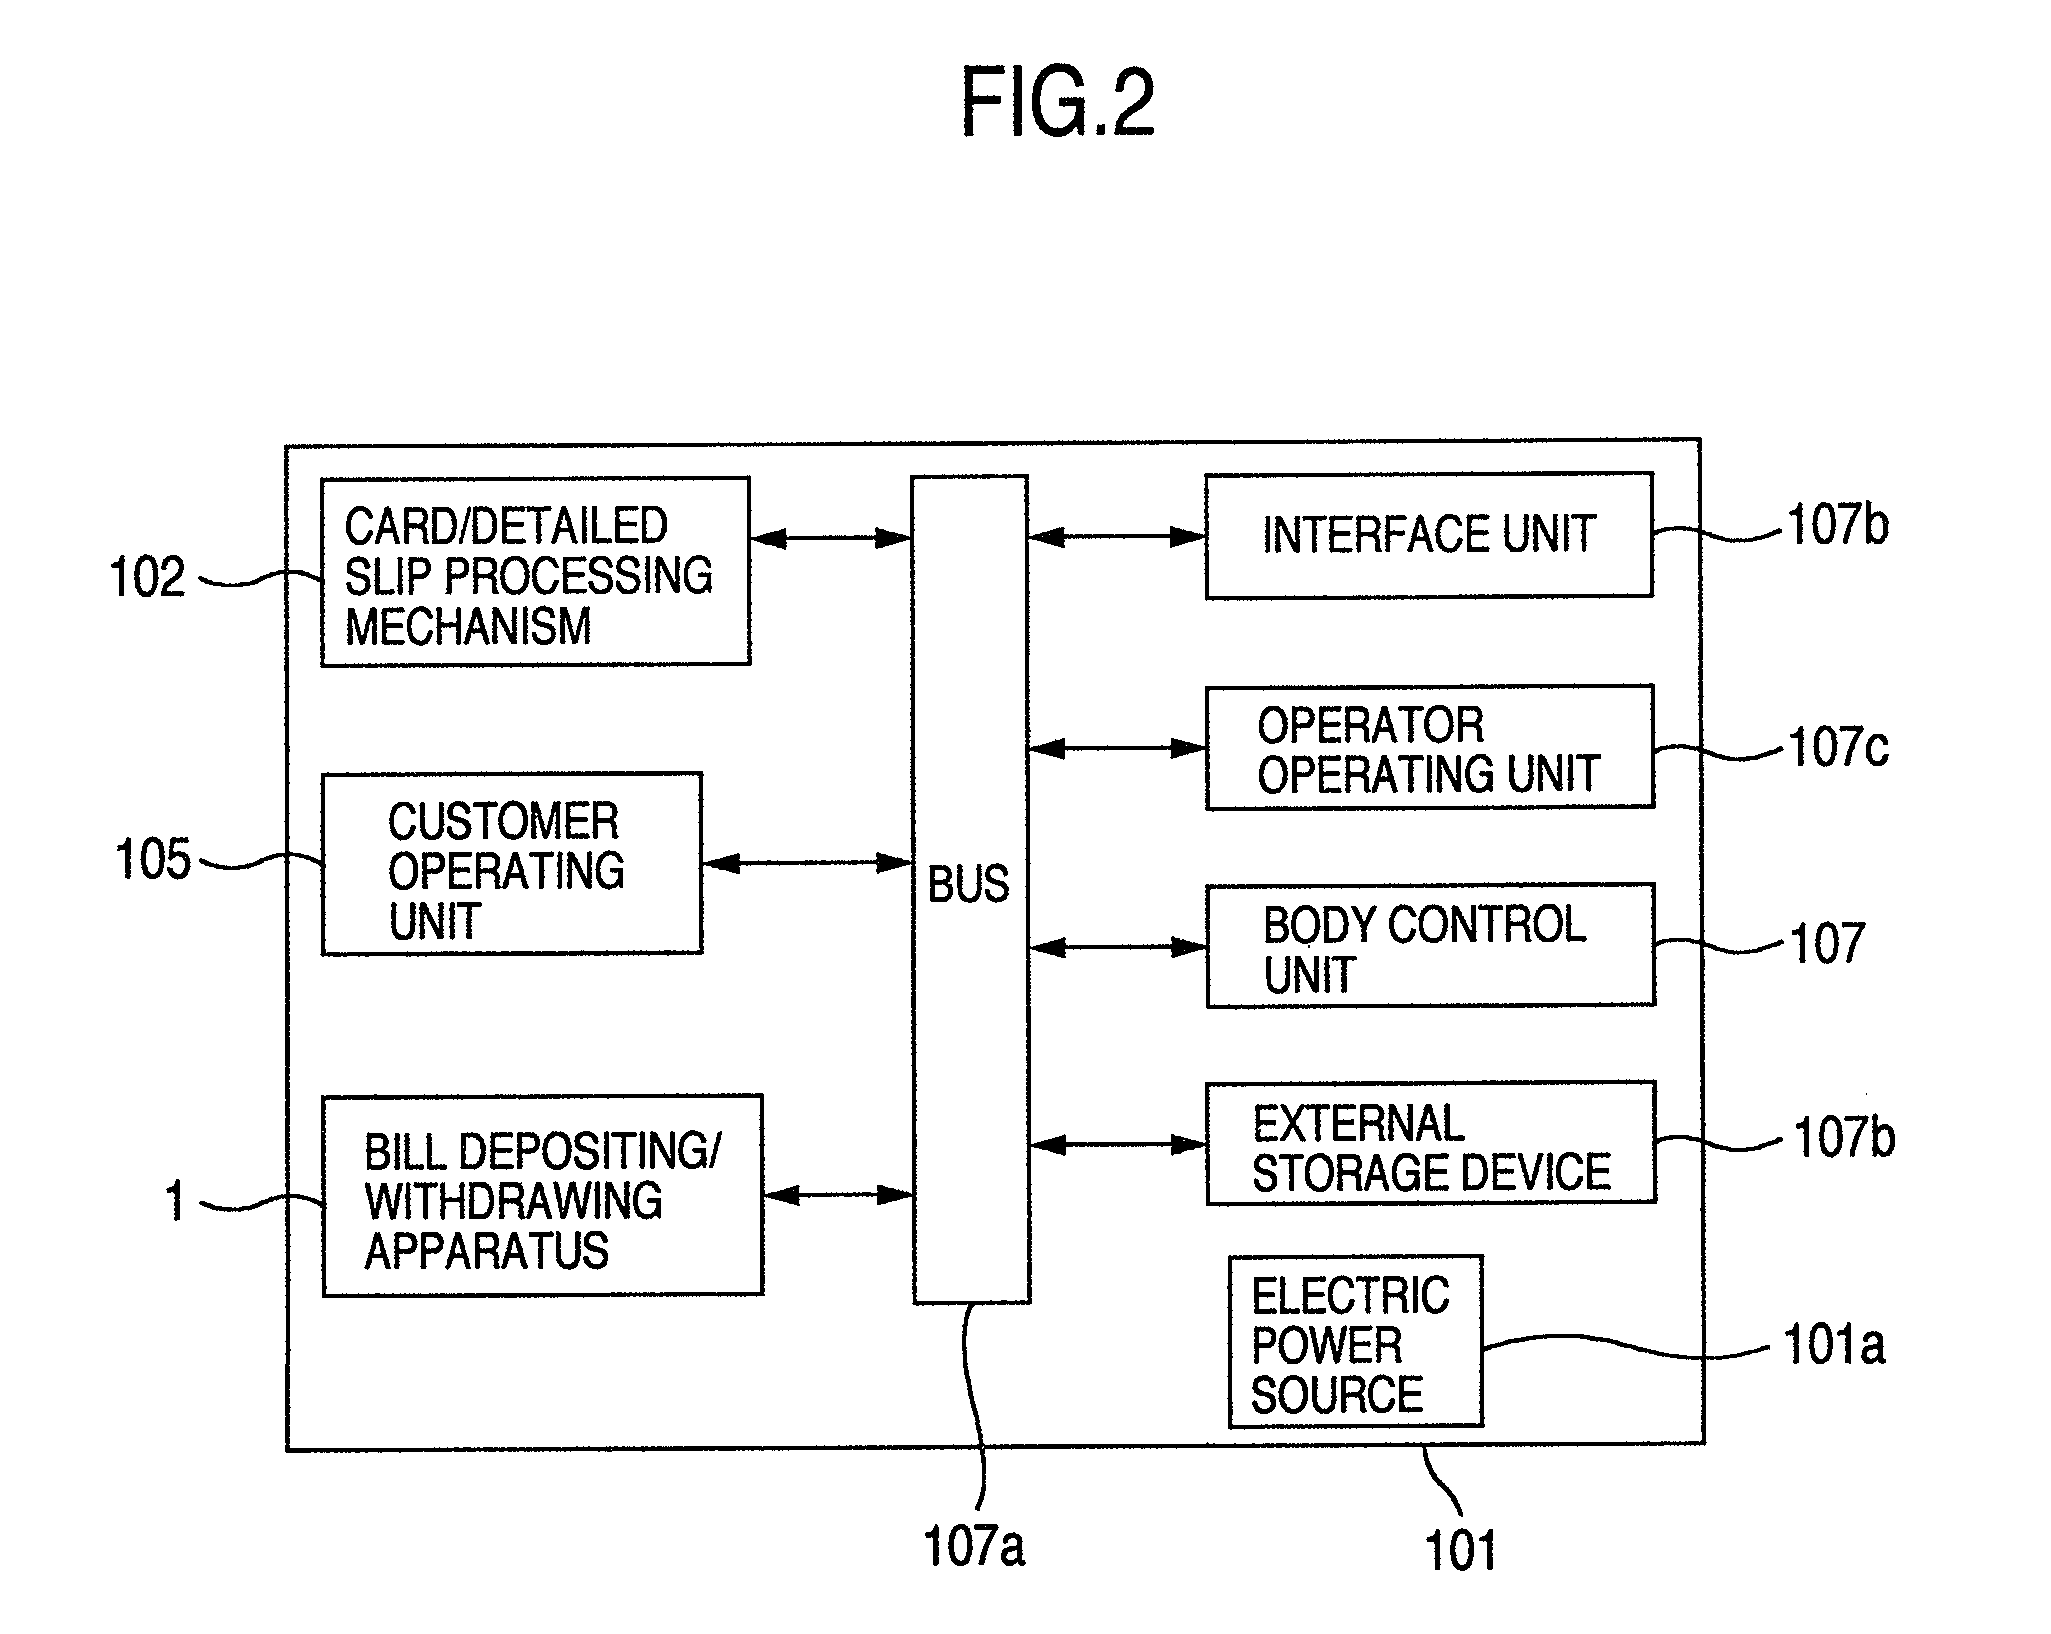 Bill depositing/withdrawing apparatus and method of controlling the same